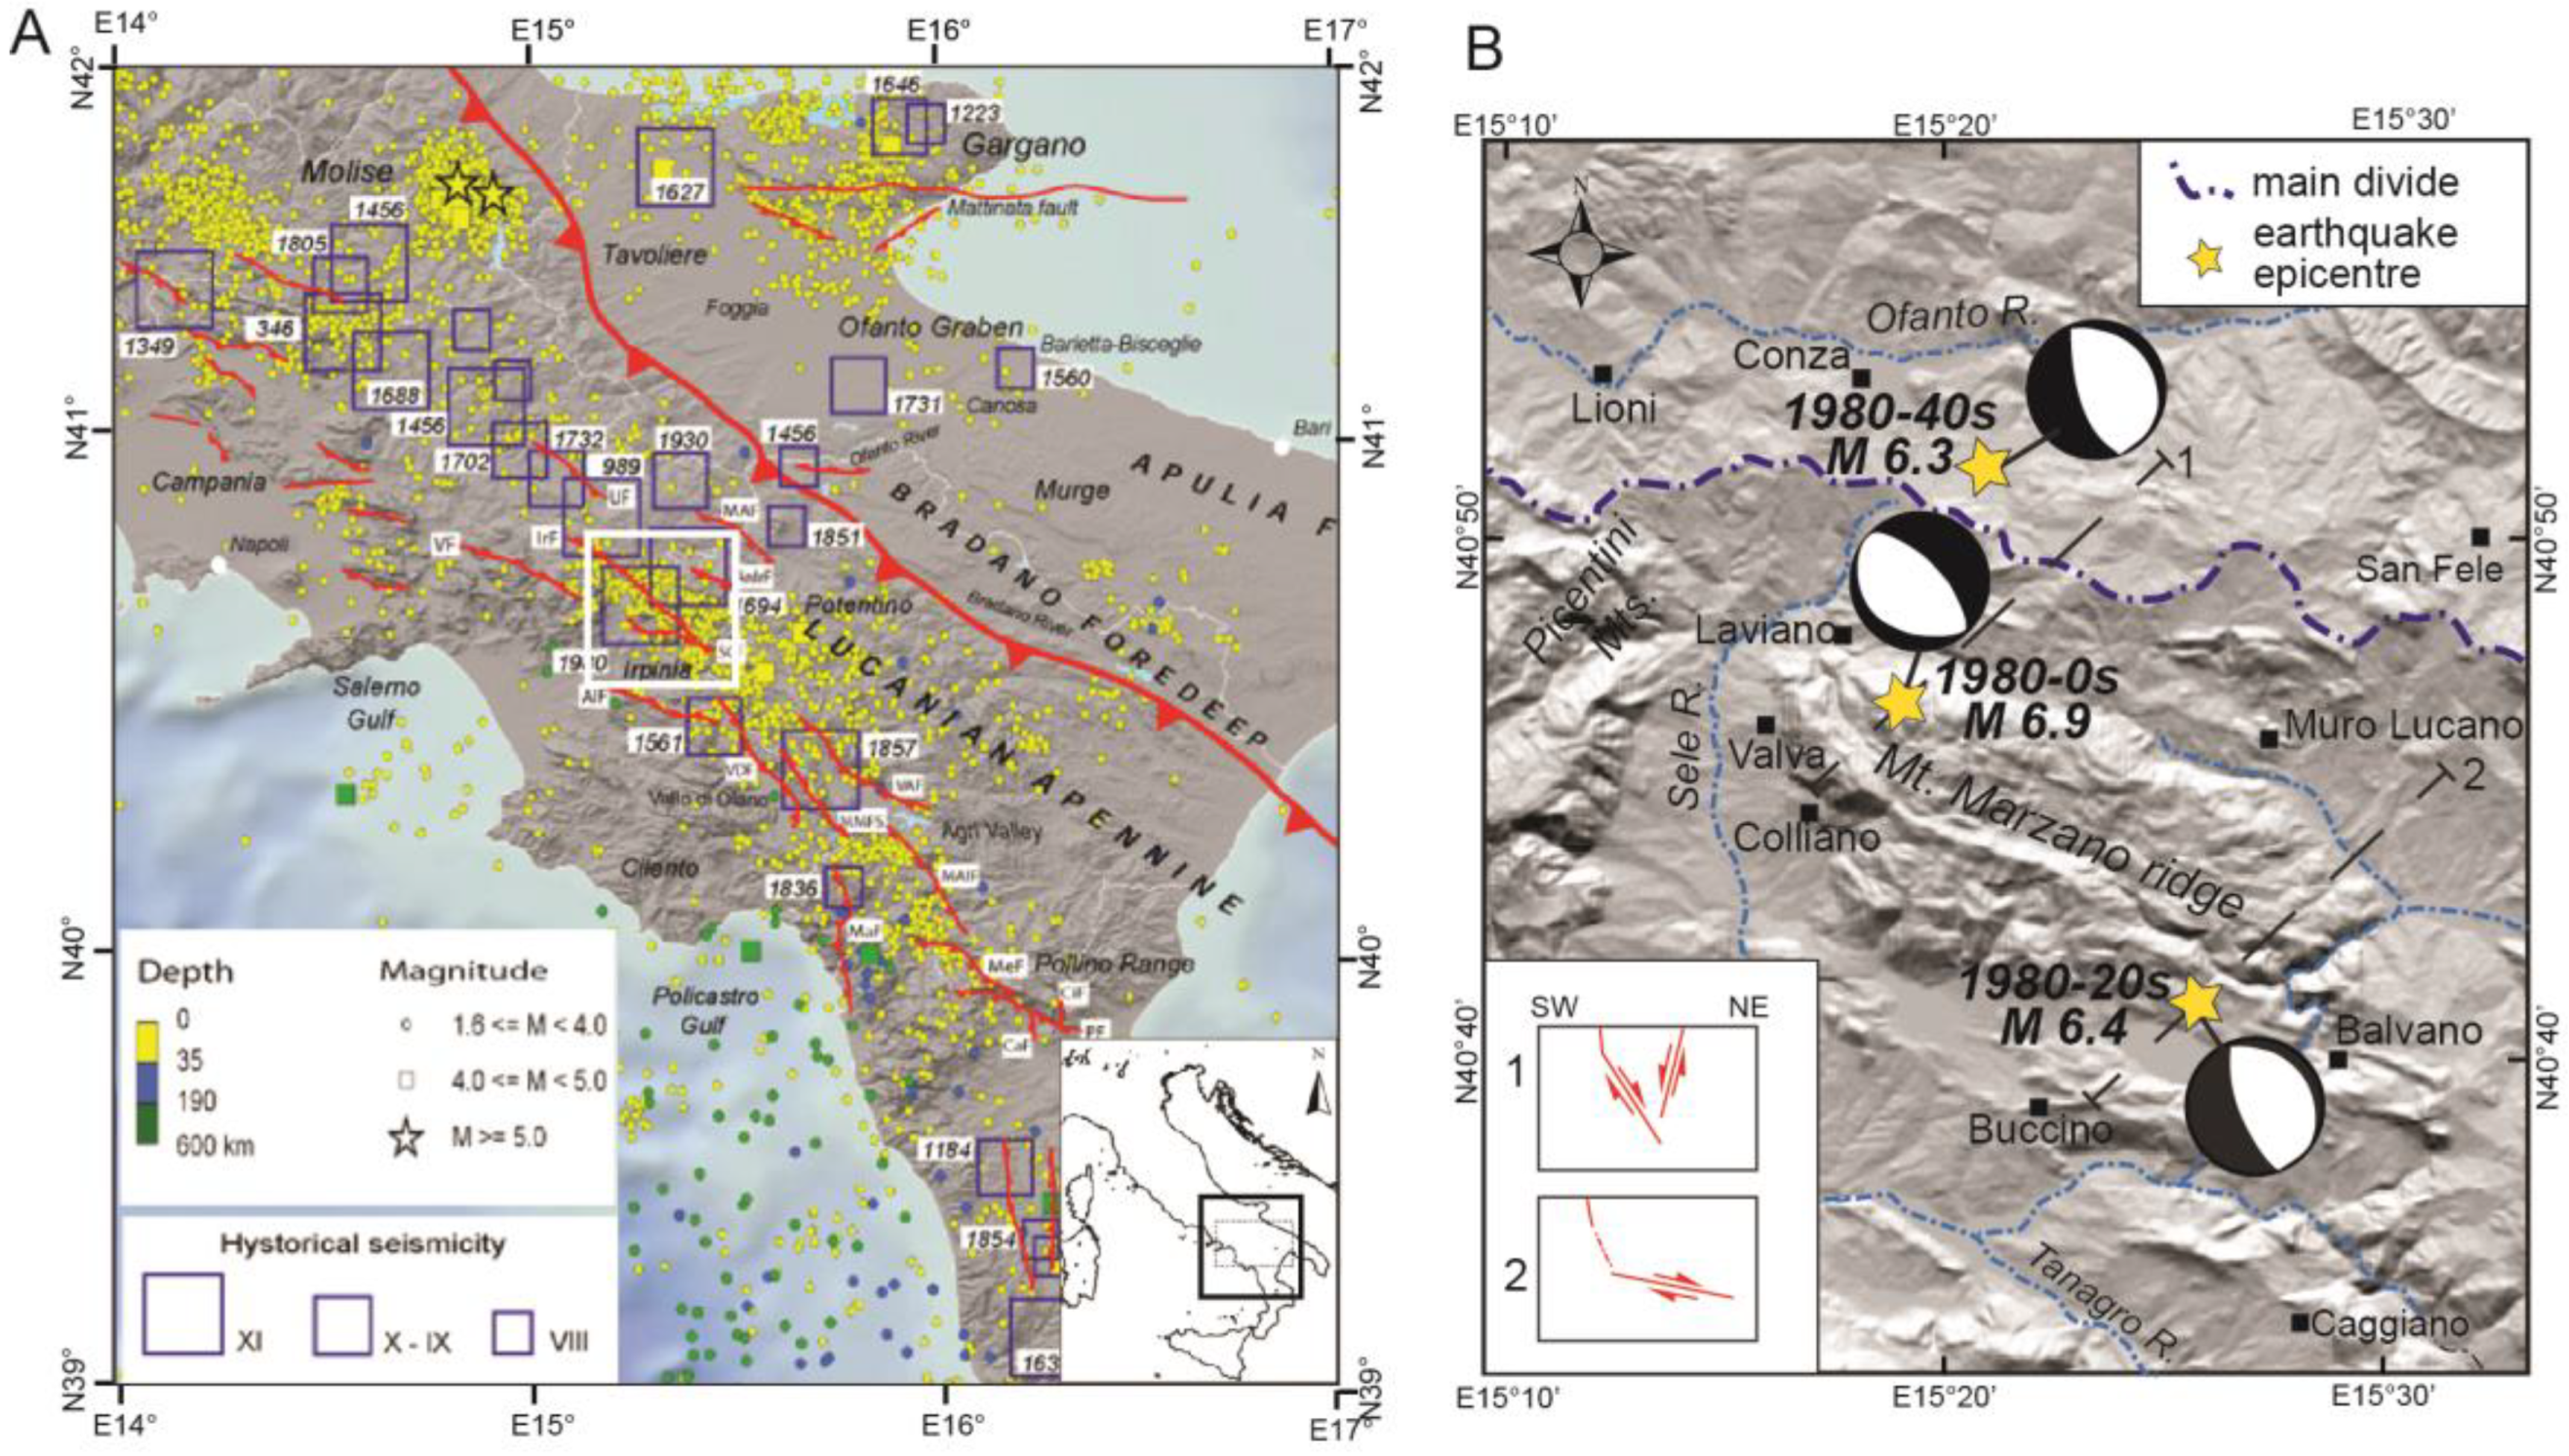 Geosciences | Free Full-Text | The MS 6.9, 1980 Irpinia Earthquake from the  Basement to the Surface: A Review of Tectonic Geomorphology and Geophysical  Constraints, and New Data on Postseismic Deformation | HTML